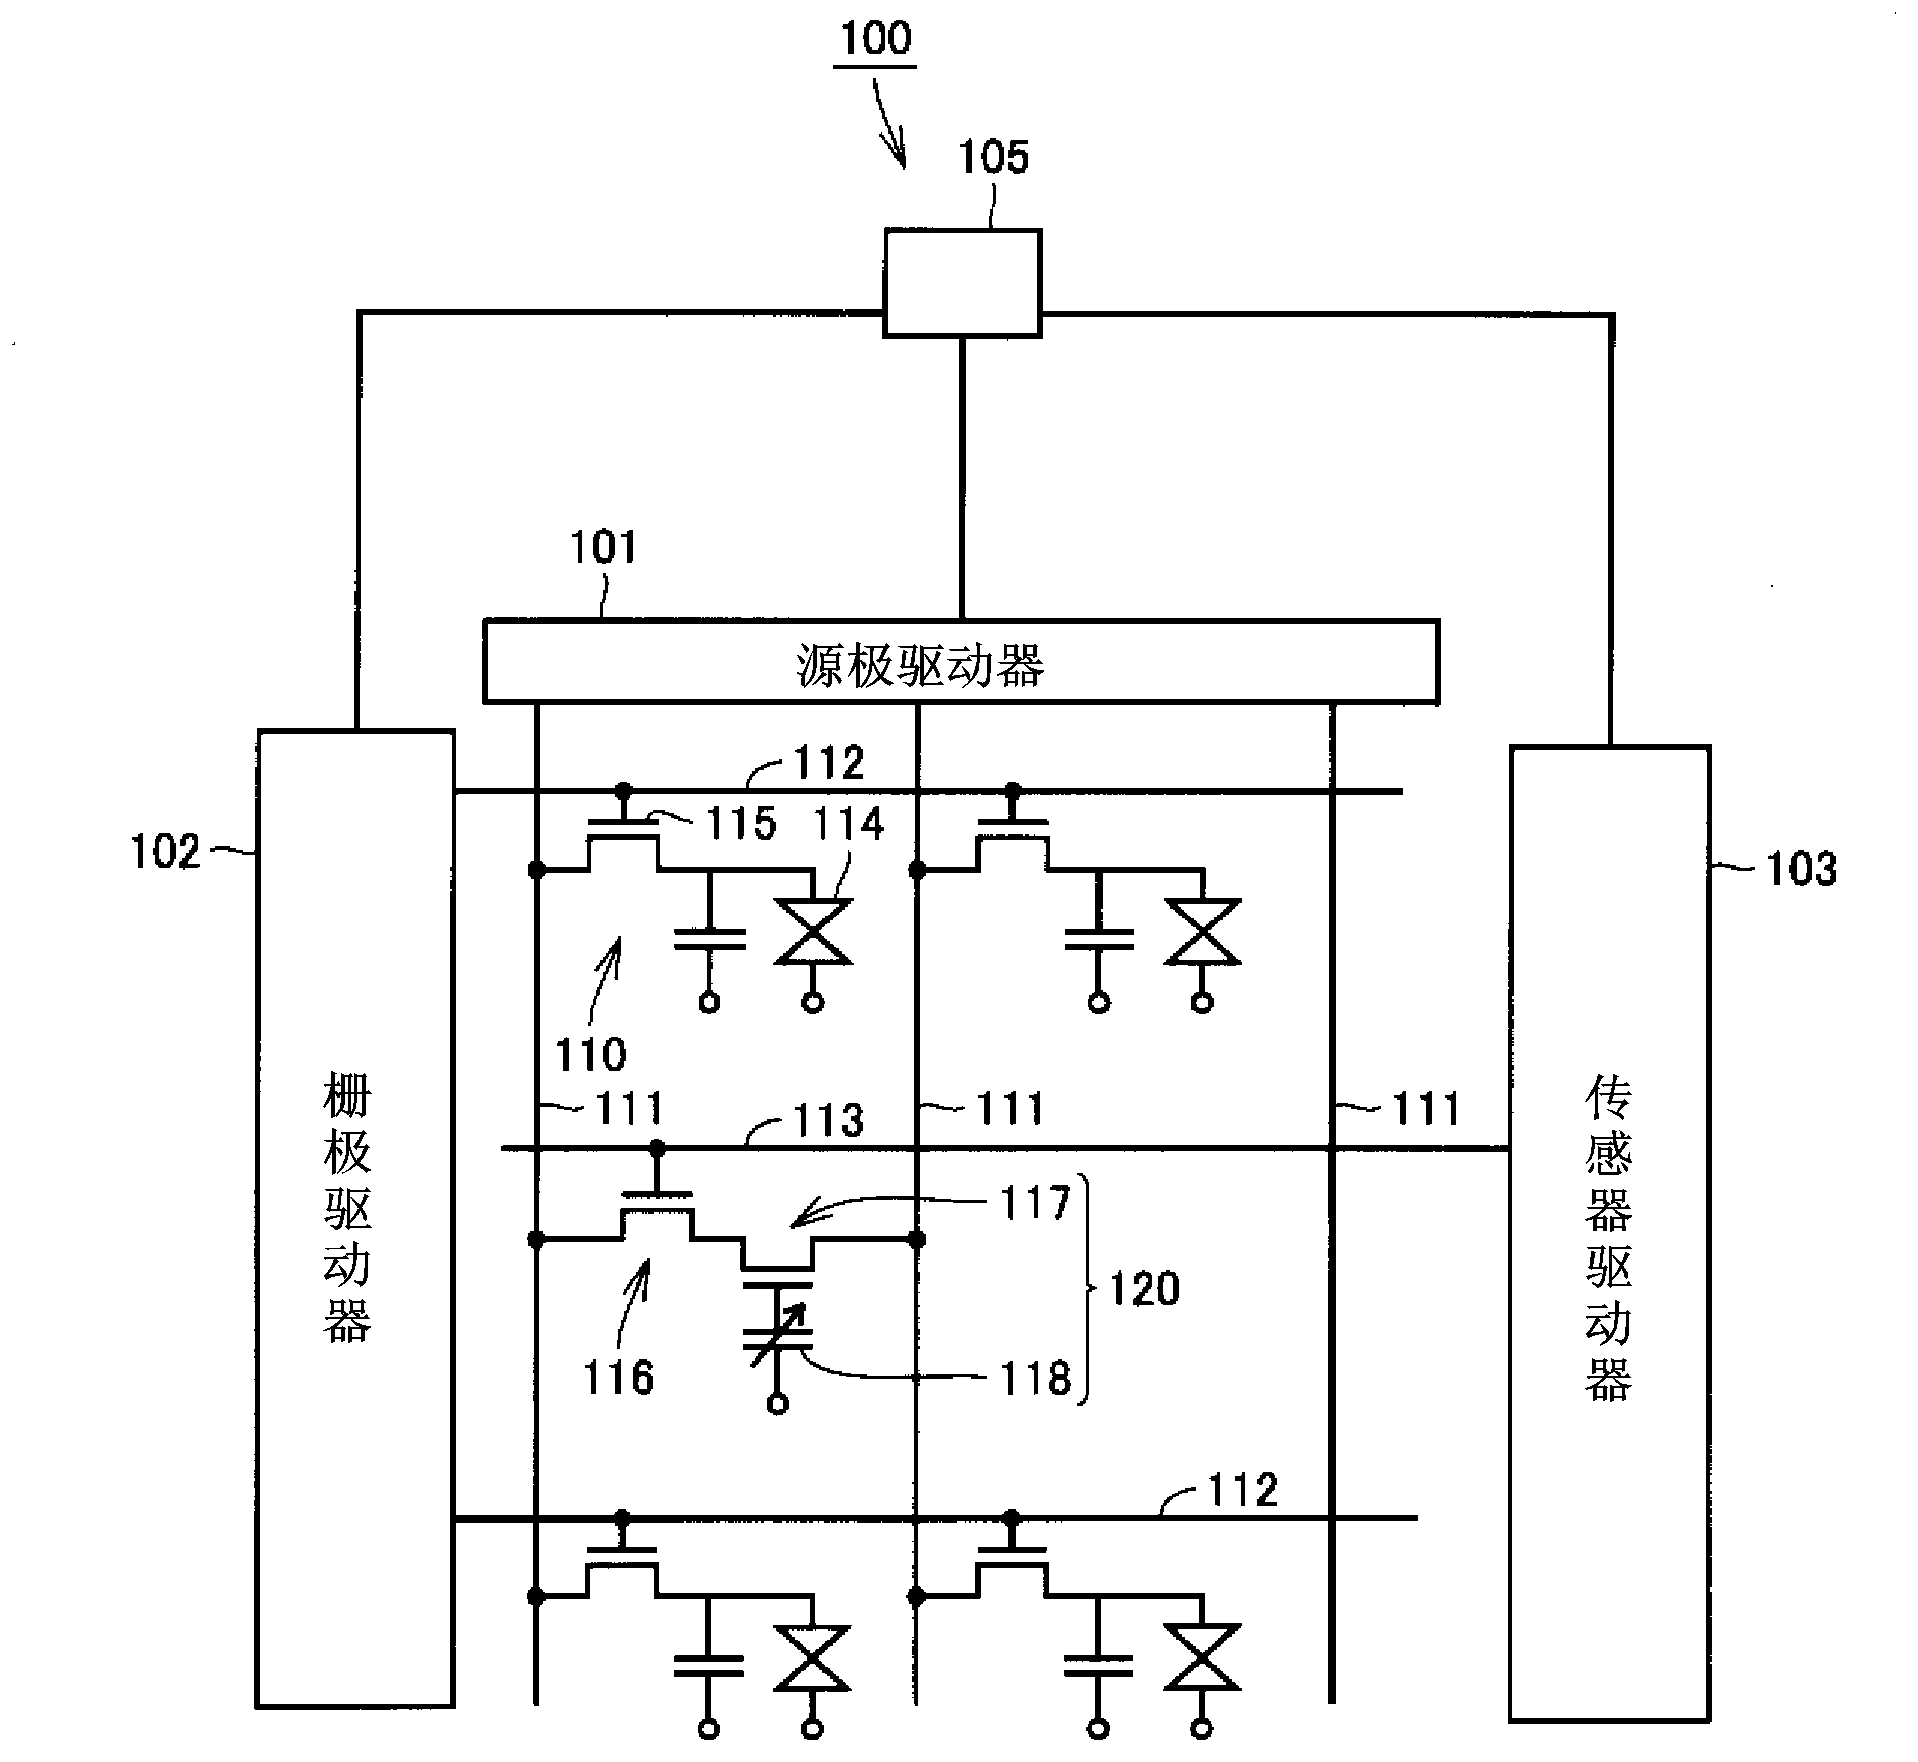 Display device with touch panel functionality